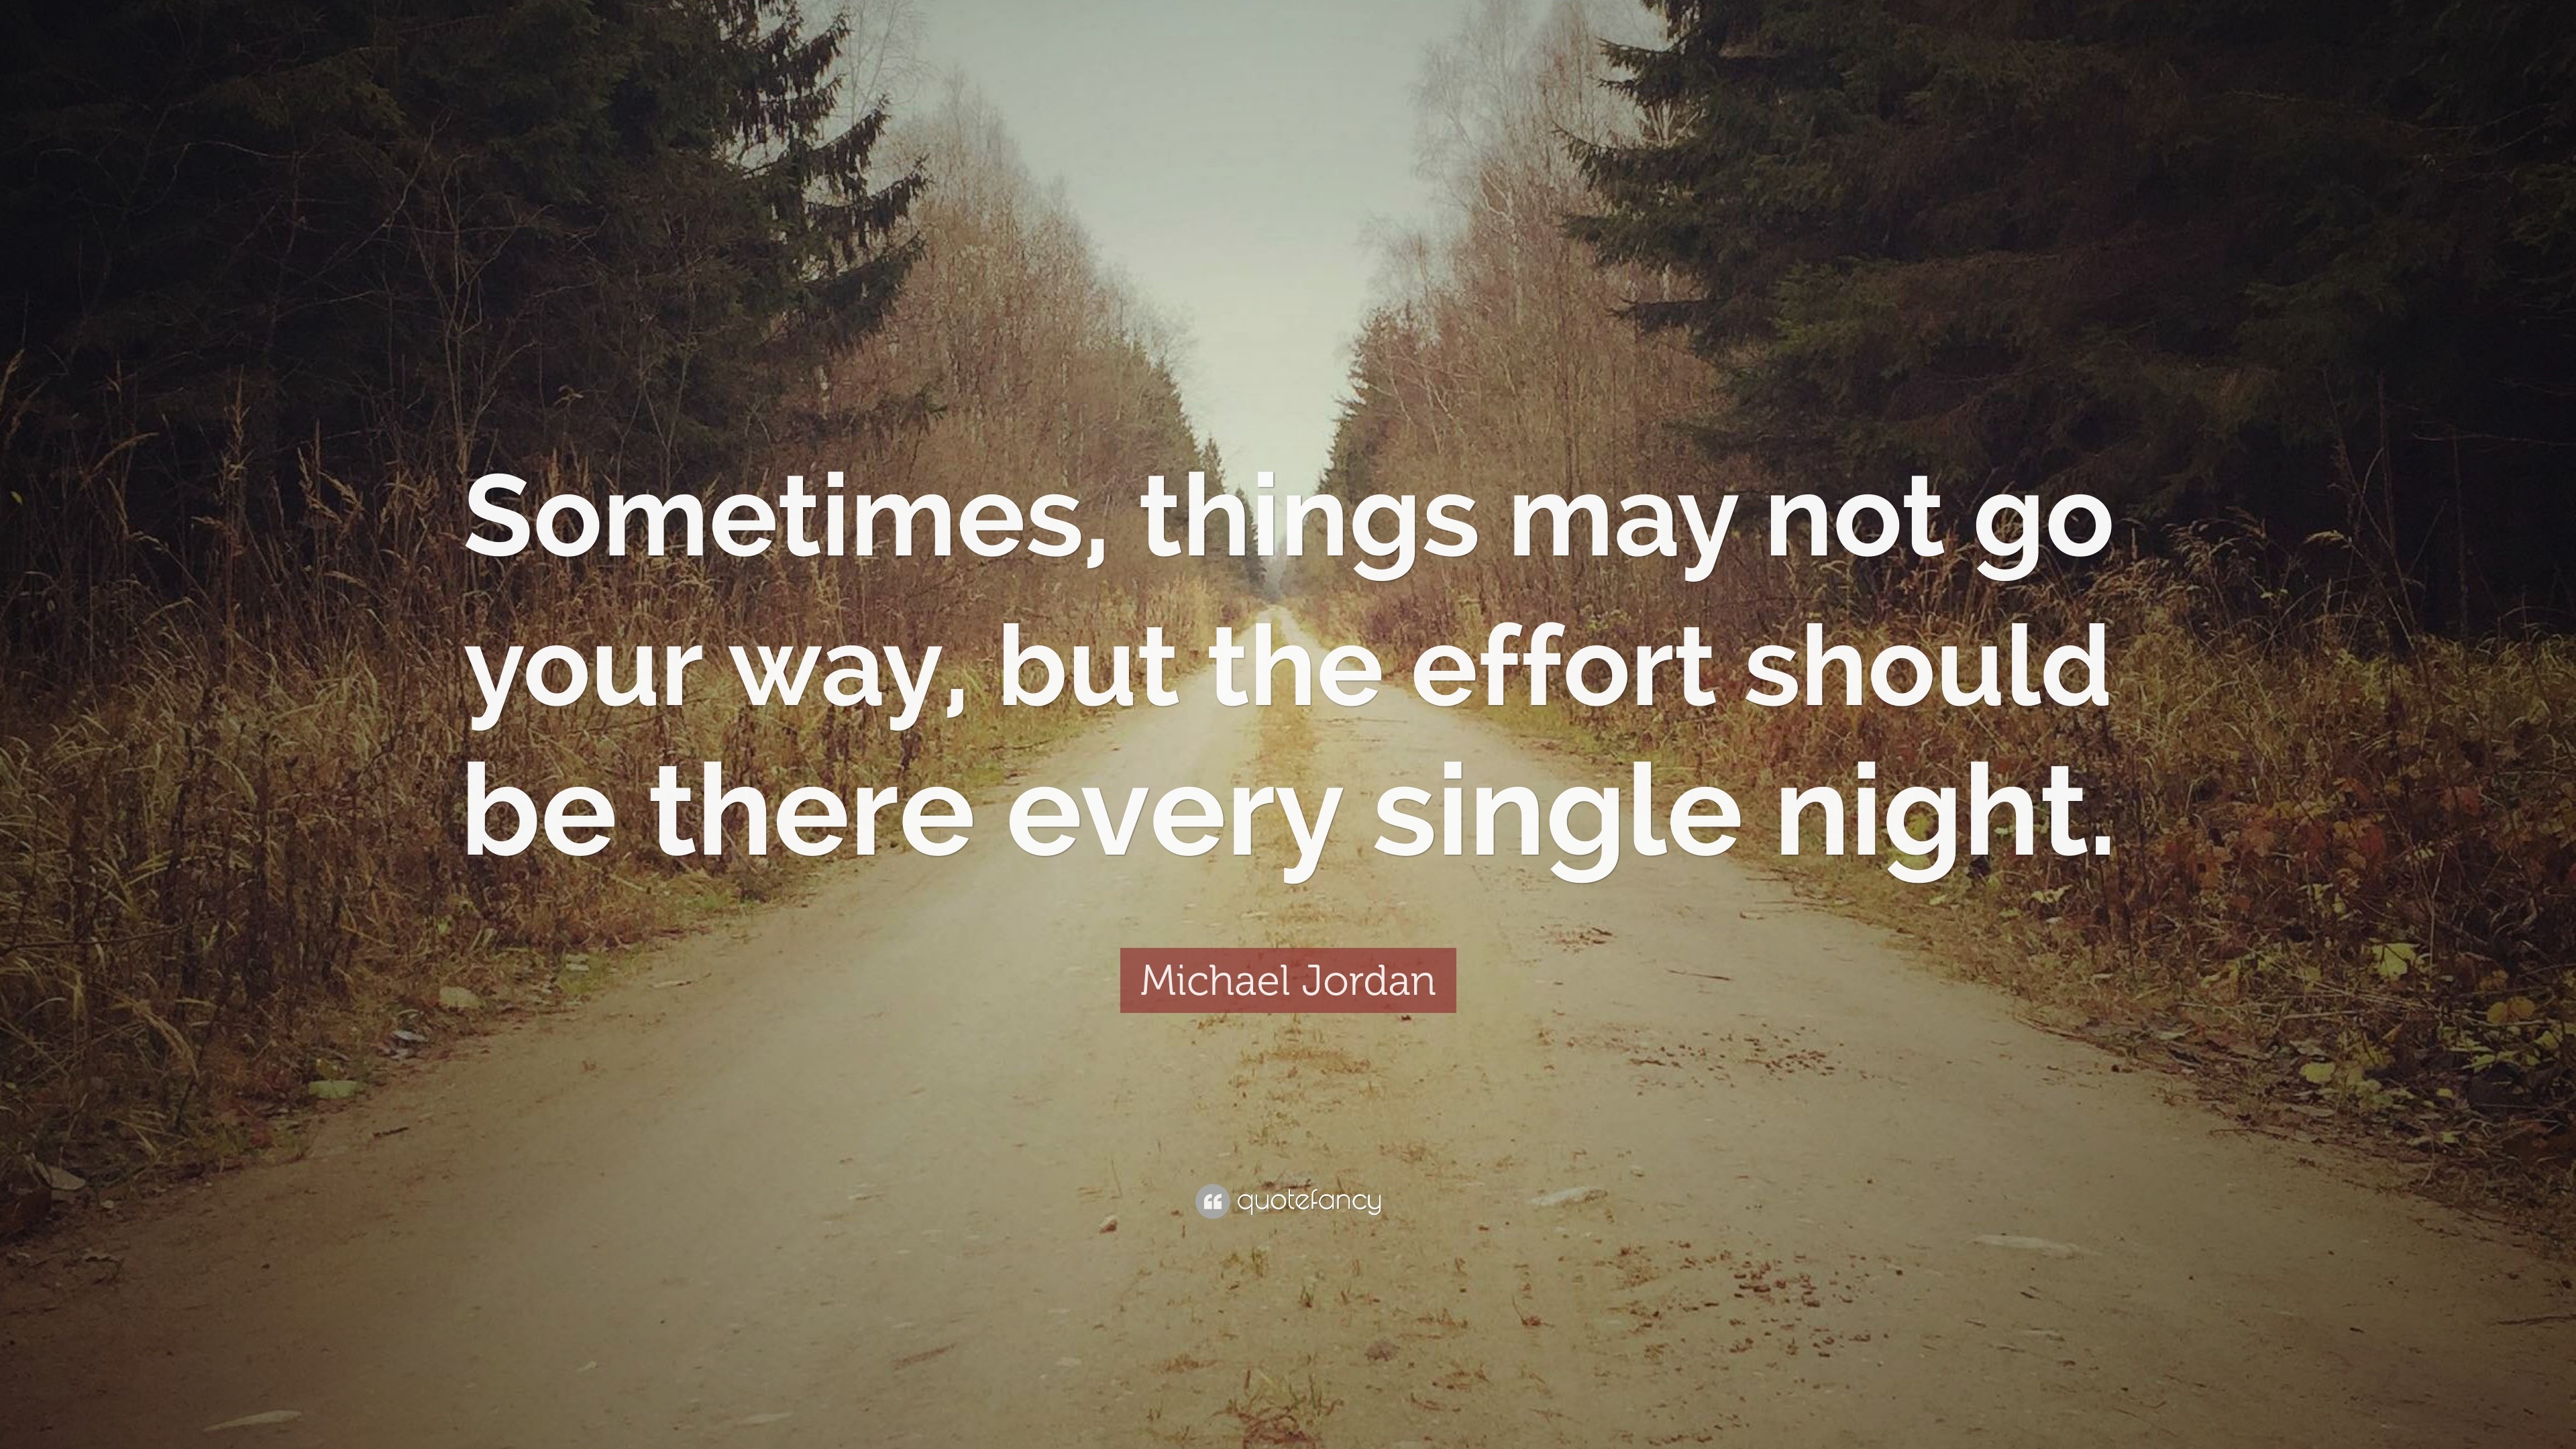 Michael Jordan Quote: “Sometimes, things may not go your way, but the ...